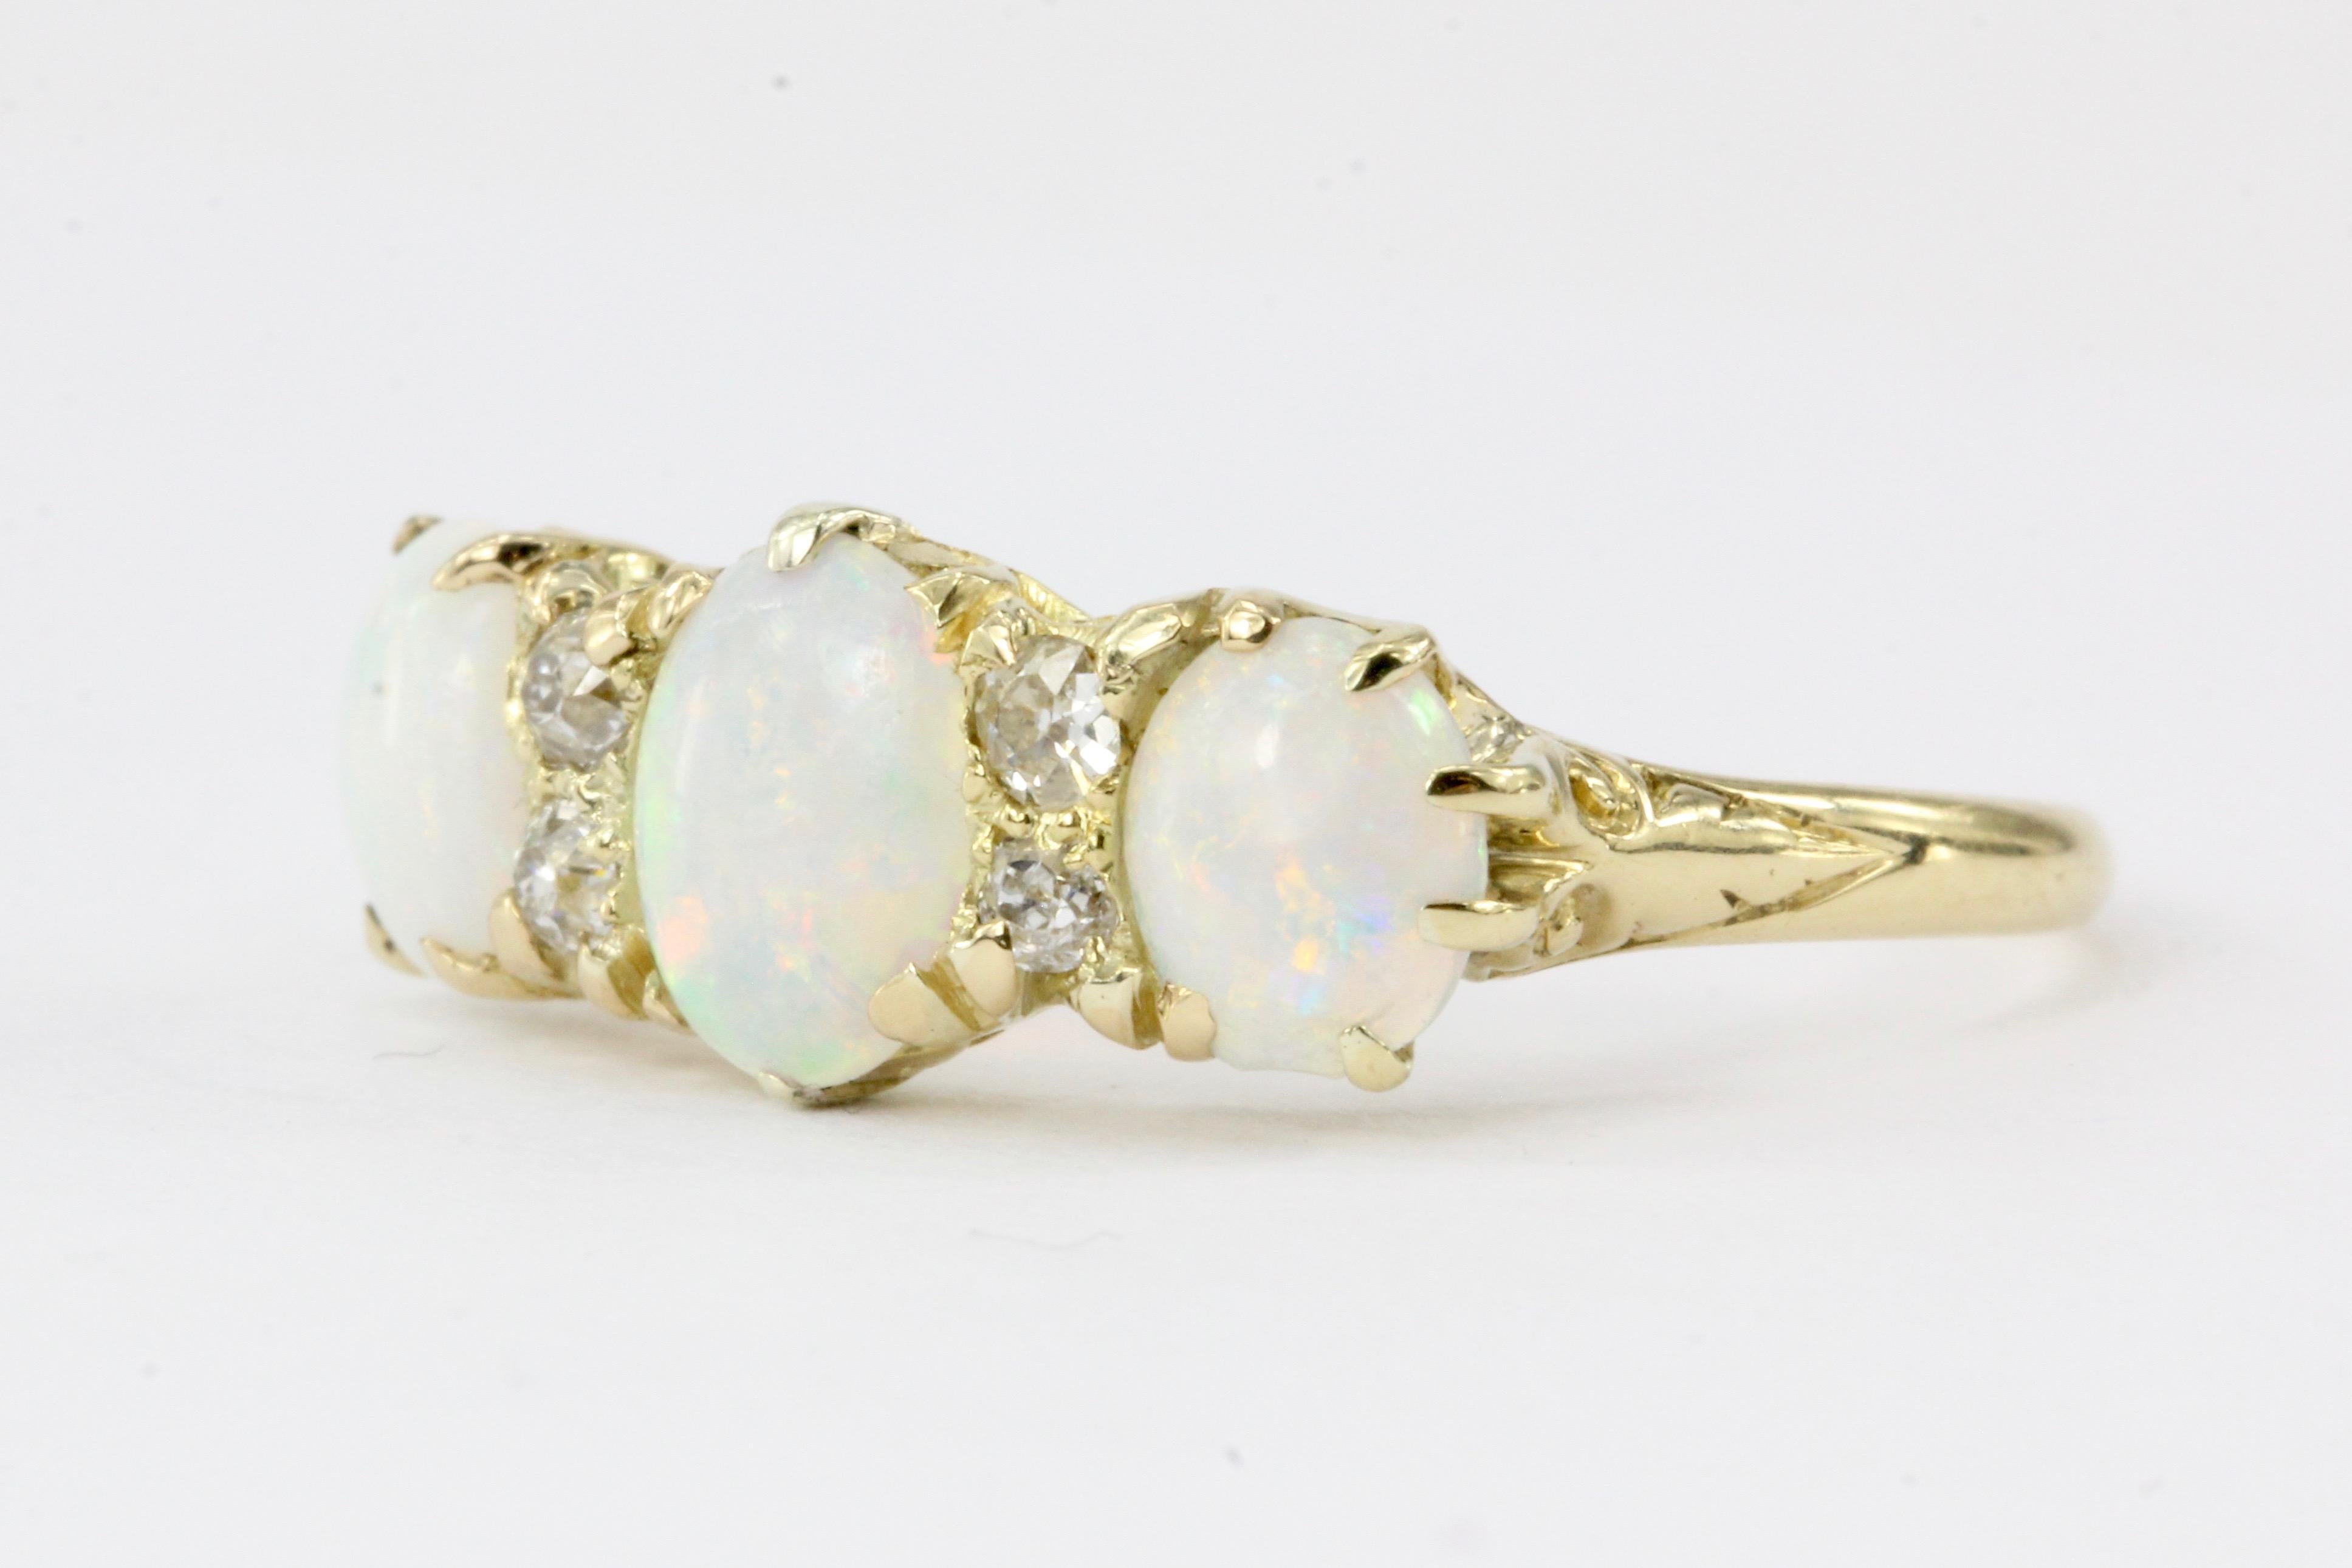 Era: Victorian (late 1800’s)

Hallmarks: 18K

Composition: 18K Yellow Gold

Primary Stone: Opals

Stone Carat: Approximately .75 carats total weight

Shape: oval

Accent Stone: Old Mine Cut Diamonds

Color/Clarity: I/J - VS2/SI1

Total Diamond